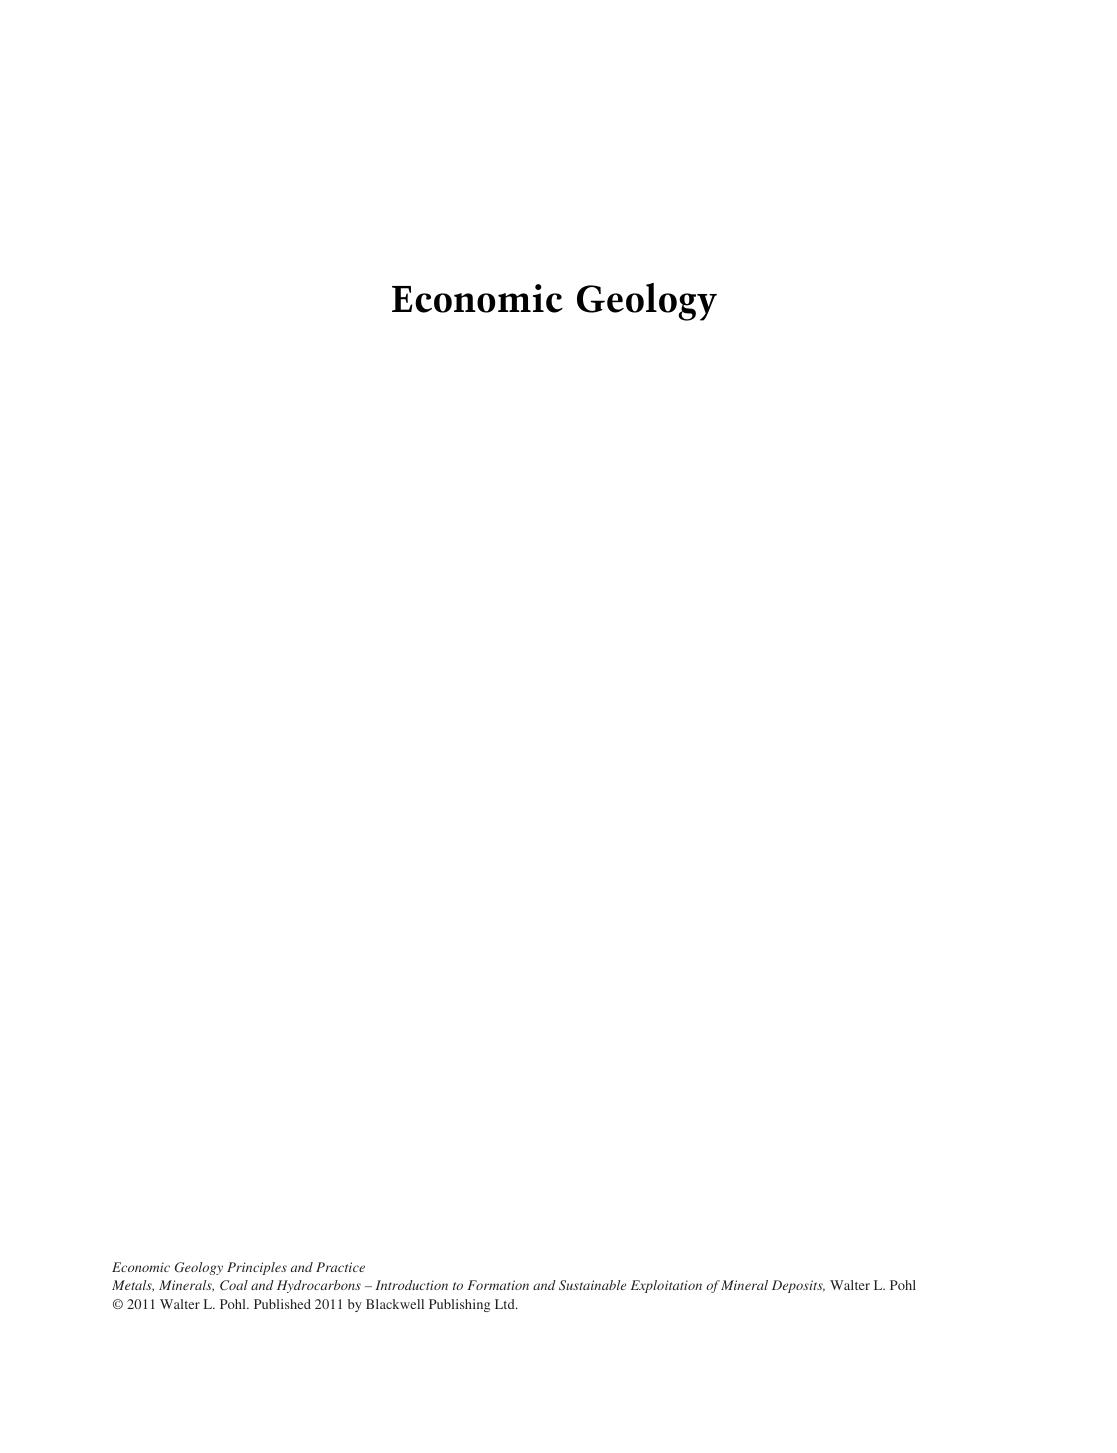 Economic Geology Principles and Practice Metals, Minerals, Coal and Hydrocarbons 2011